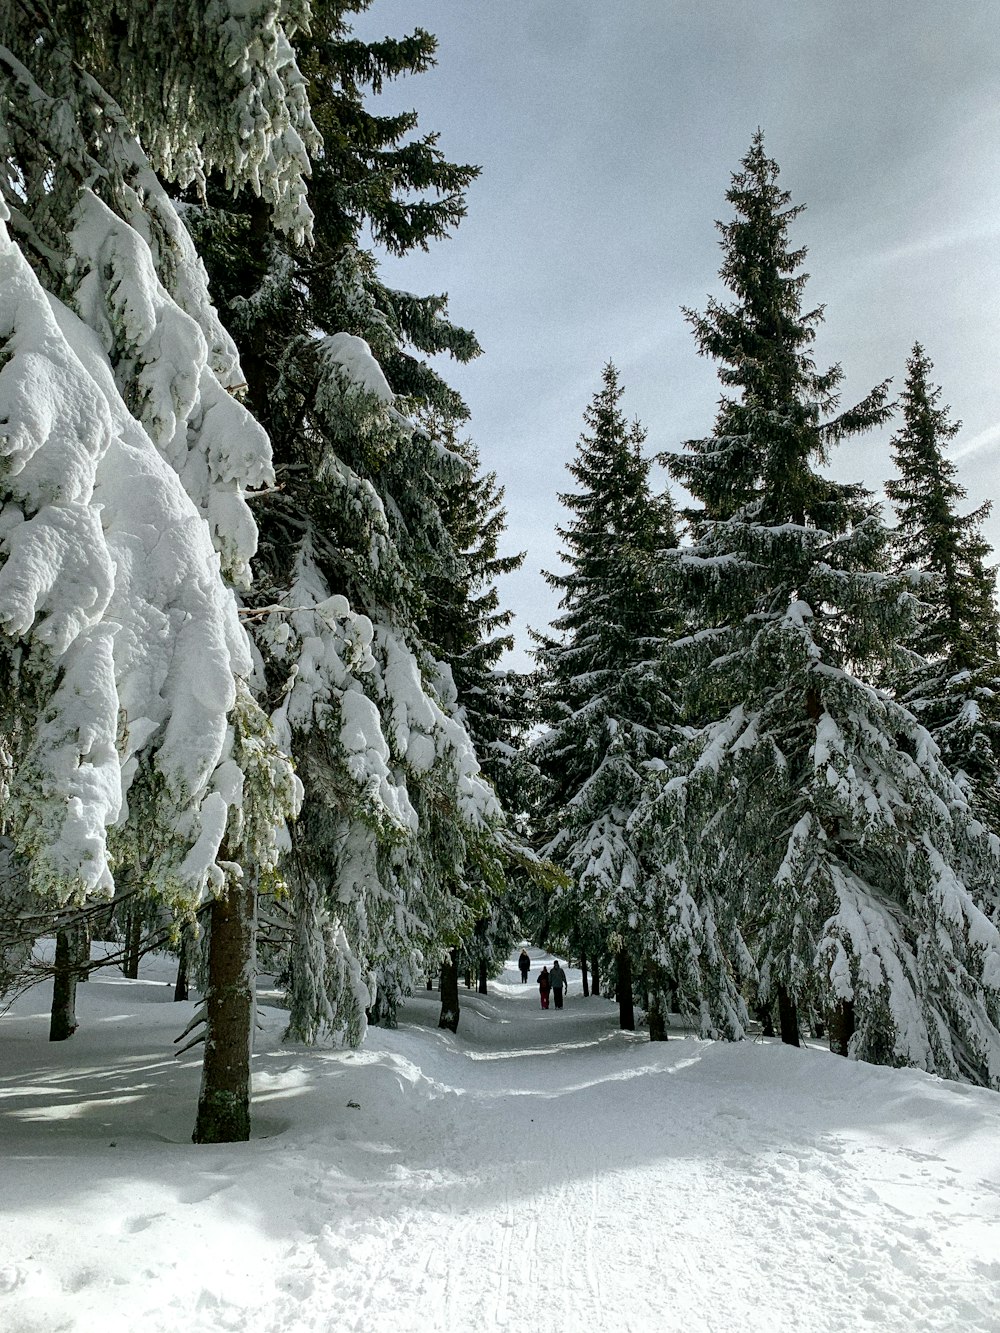 a group of people walking on a snowy path between trees